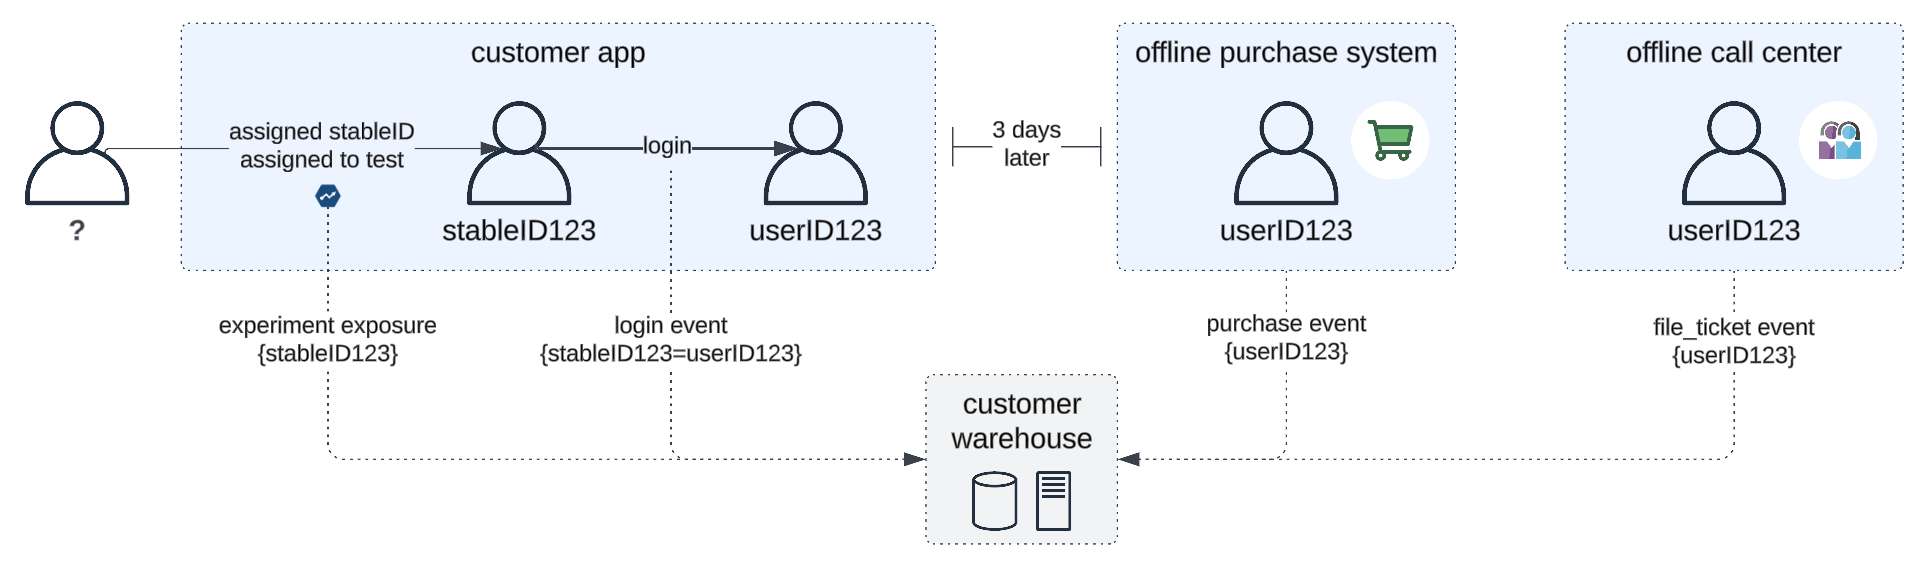 Diagram of user behavior and the data flow